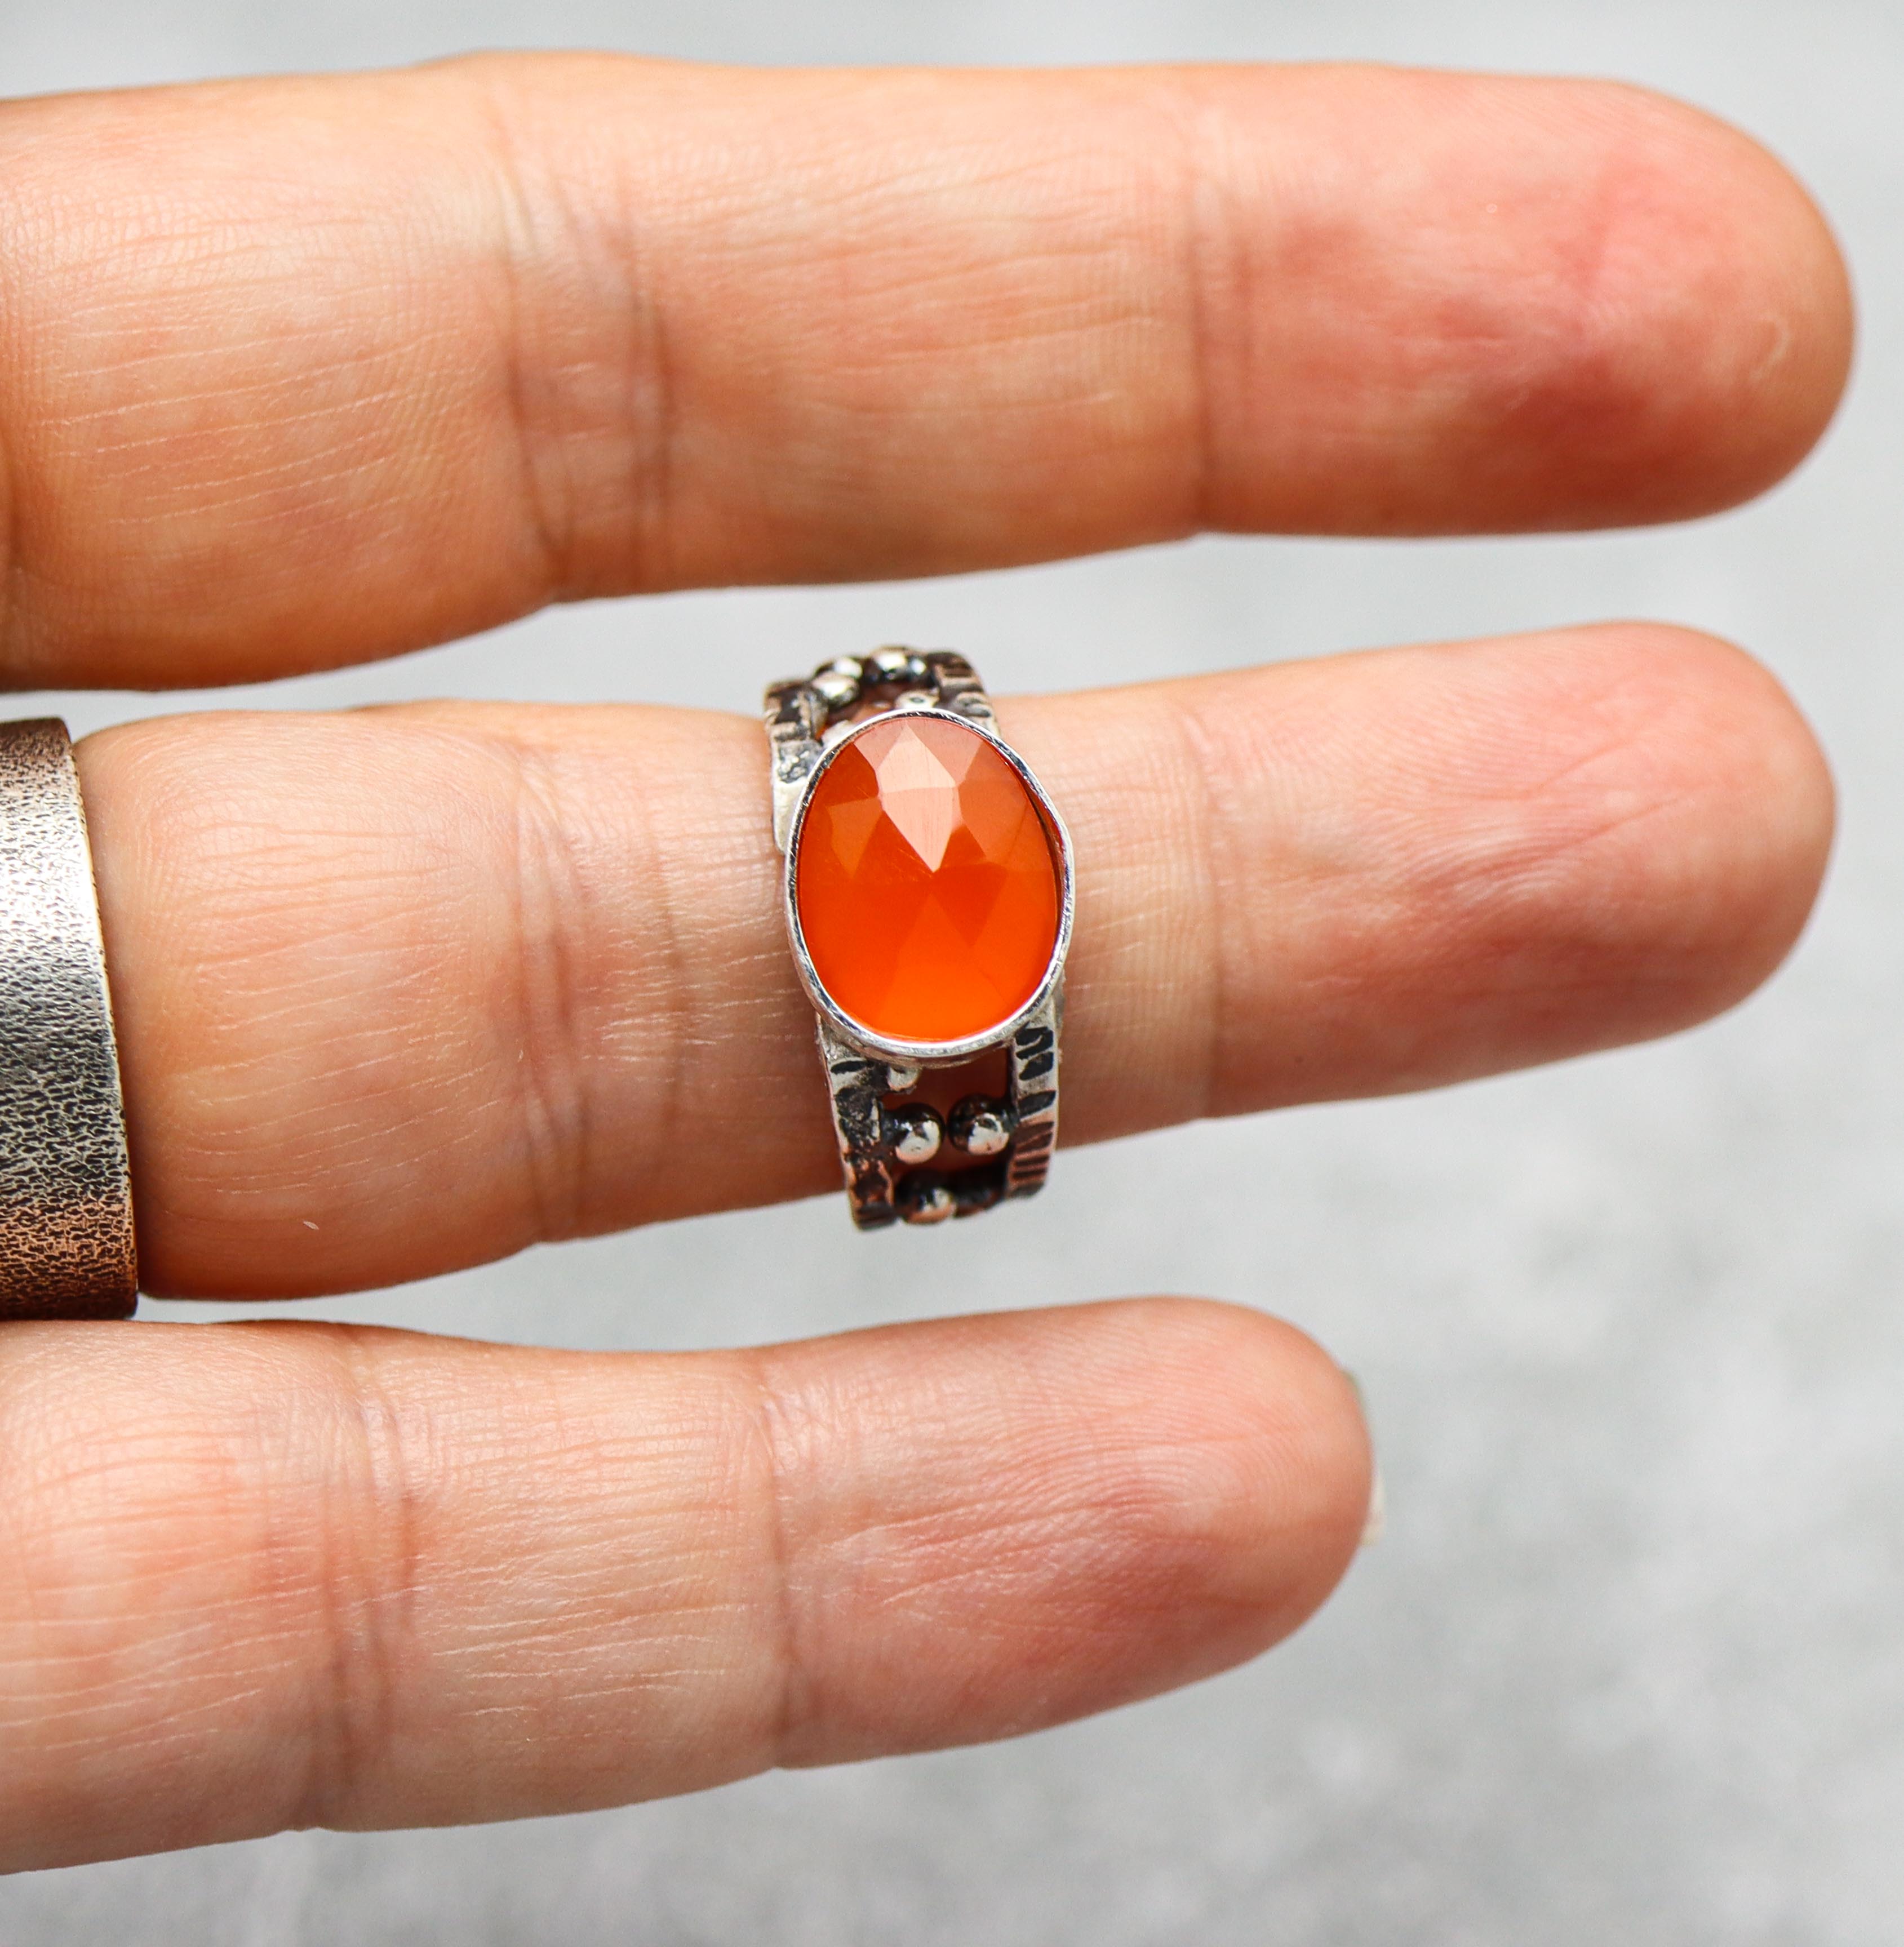 Orange Carnelian Sterling Silver Ring Made to Finish